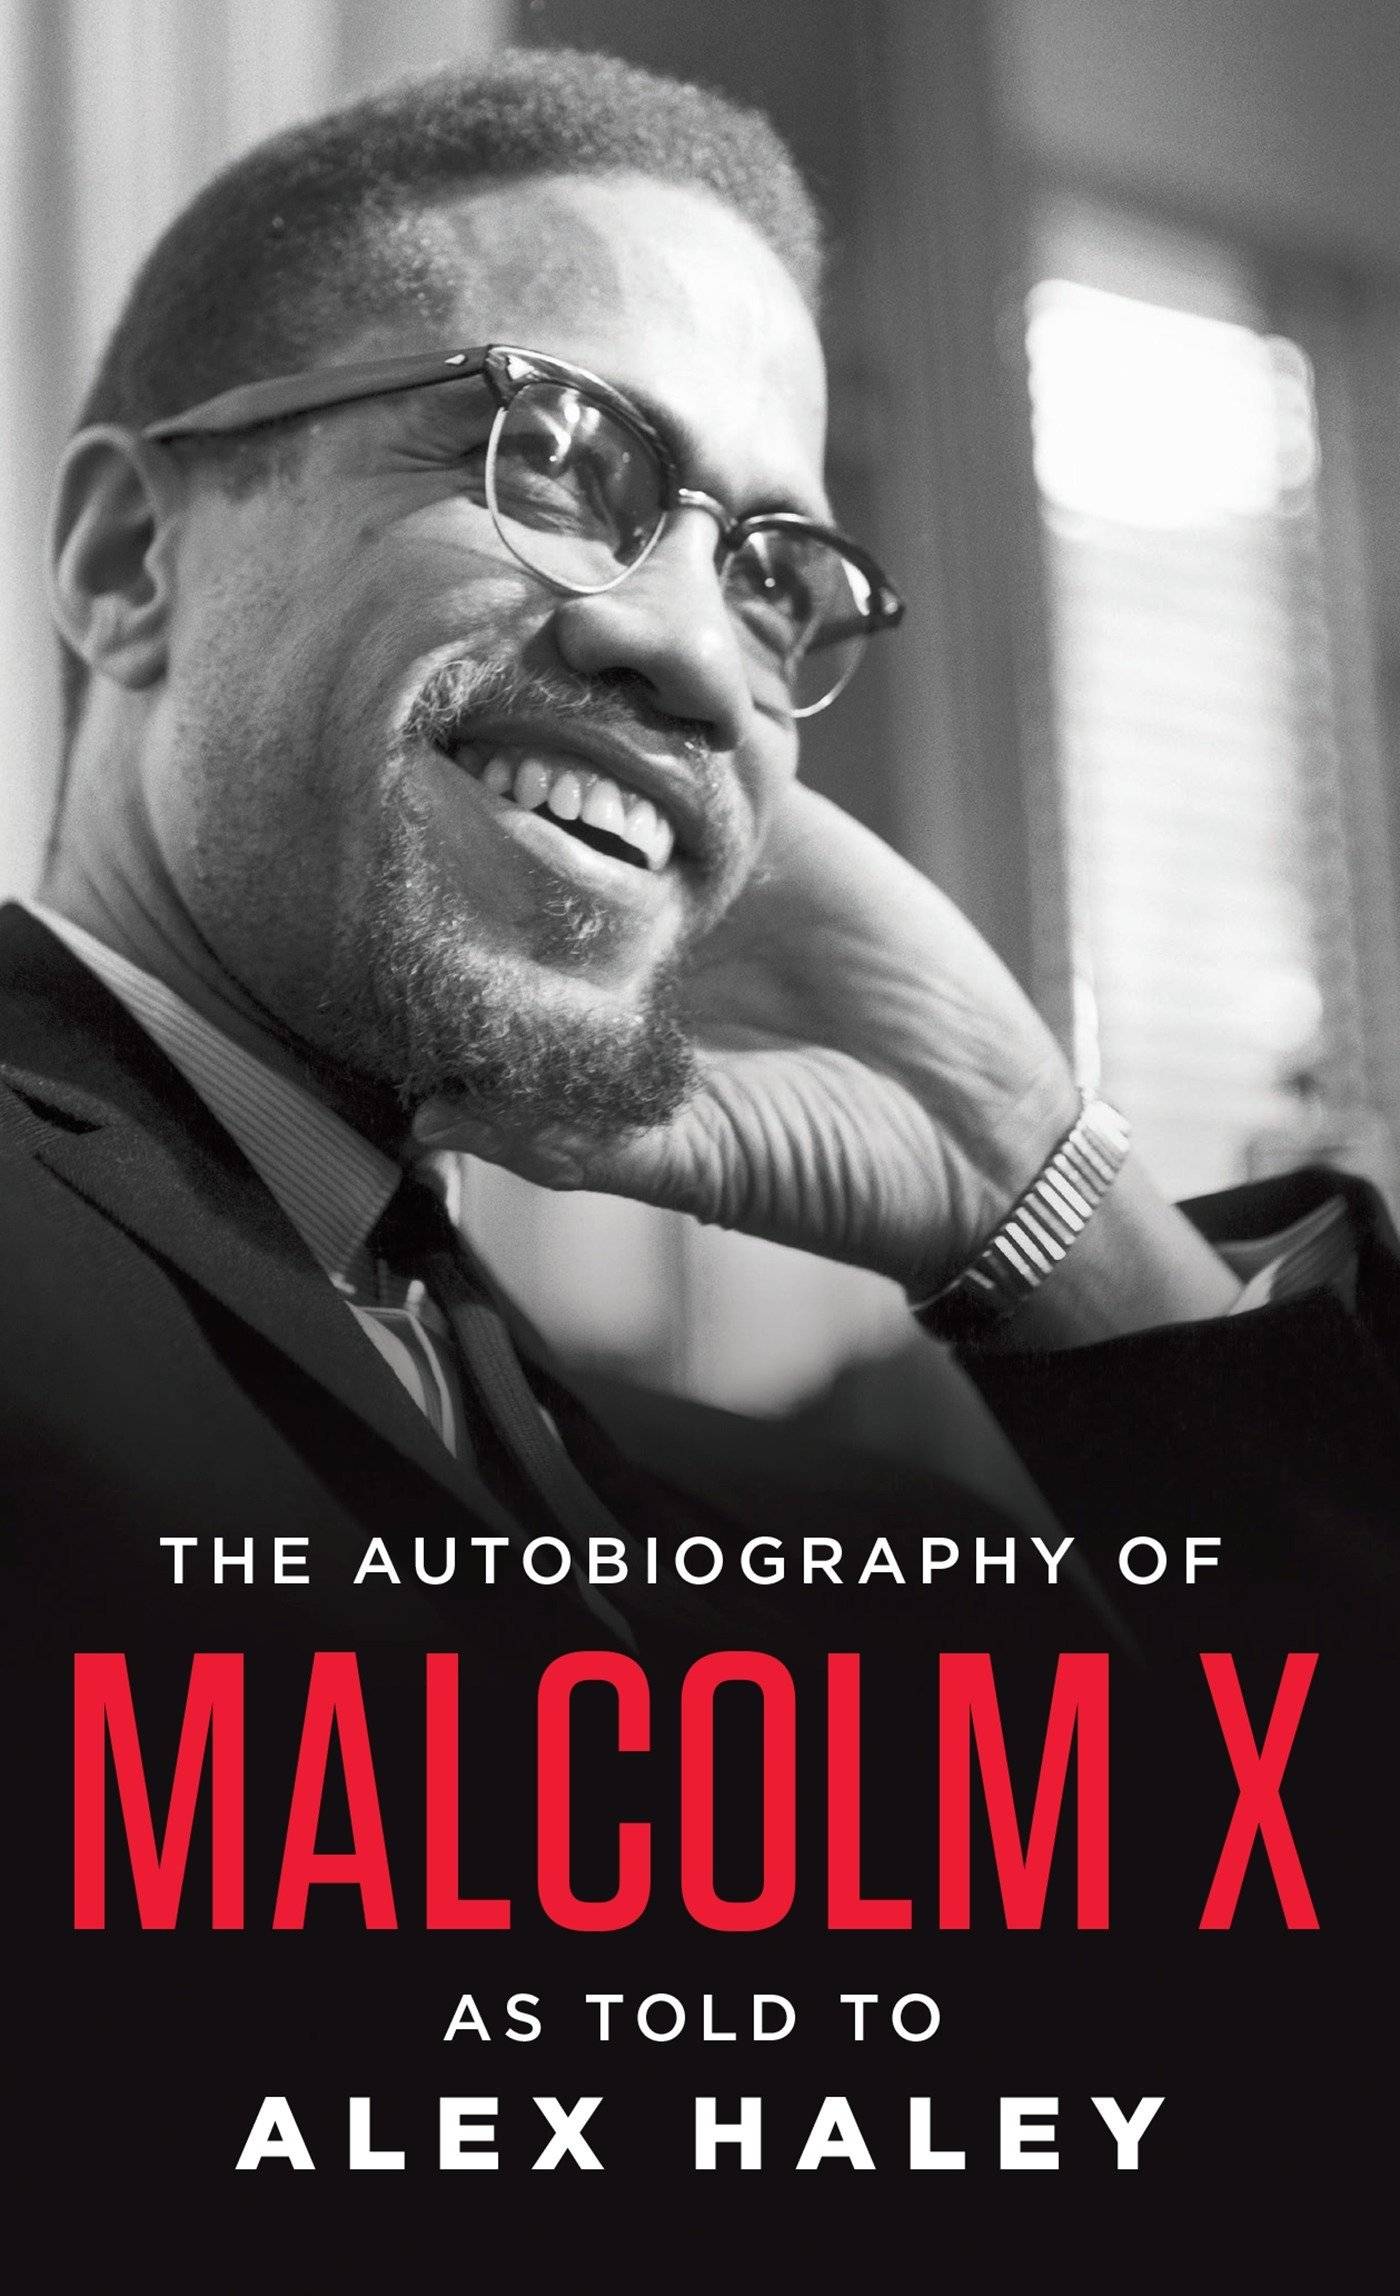 Book cover with a black and white photo of a smiling Malcolm X